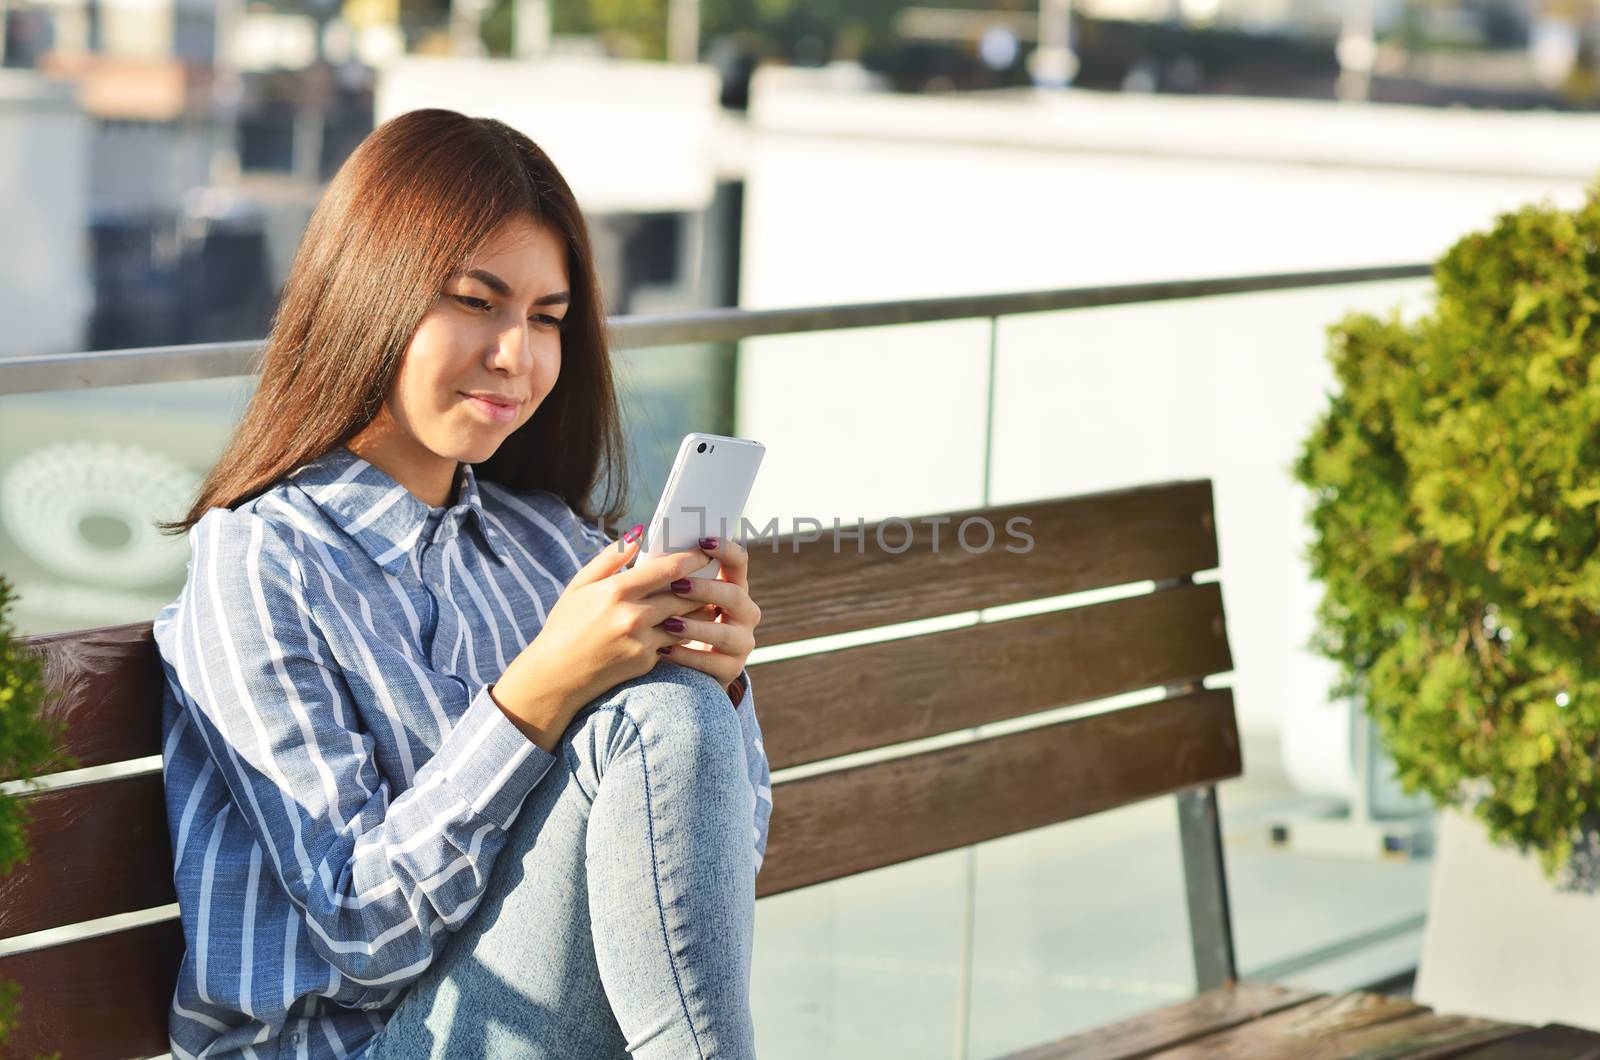 Portrait of a young girl who uses the phone while on the street near the shop